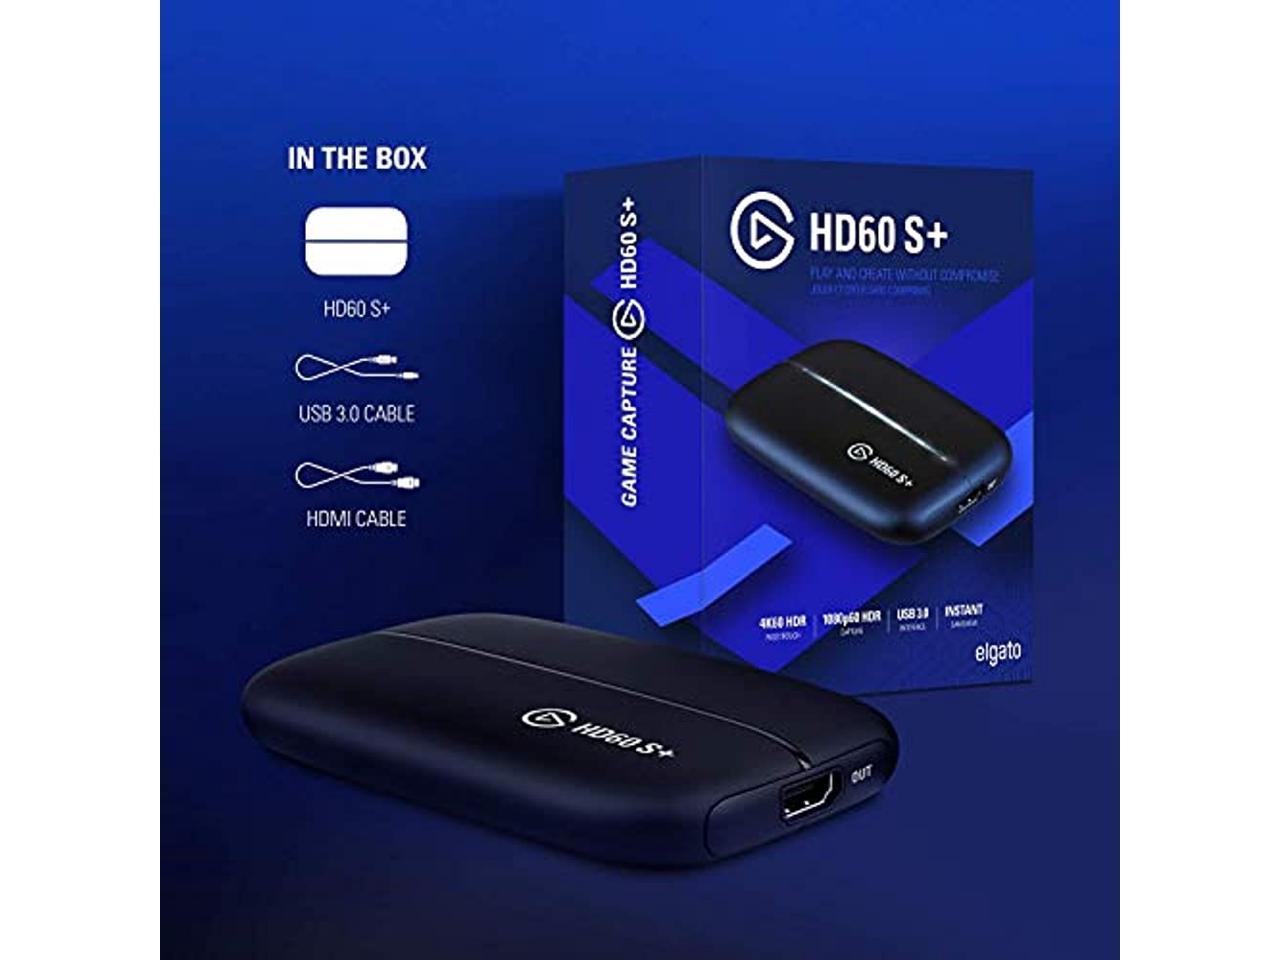 PC/タブレット PCパーツ Elgato HD60 S+, External Capture Card, Stream and Record in 